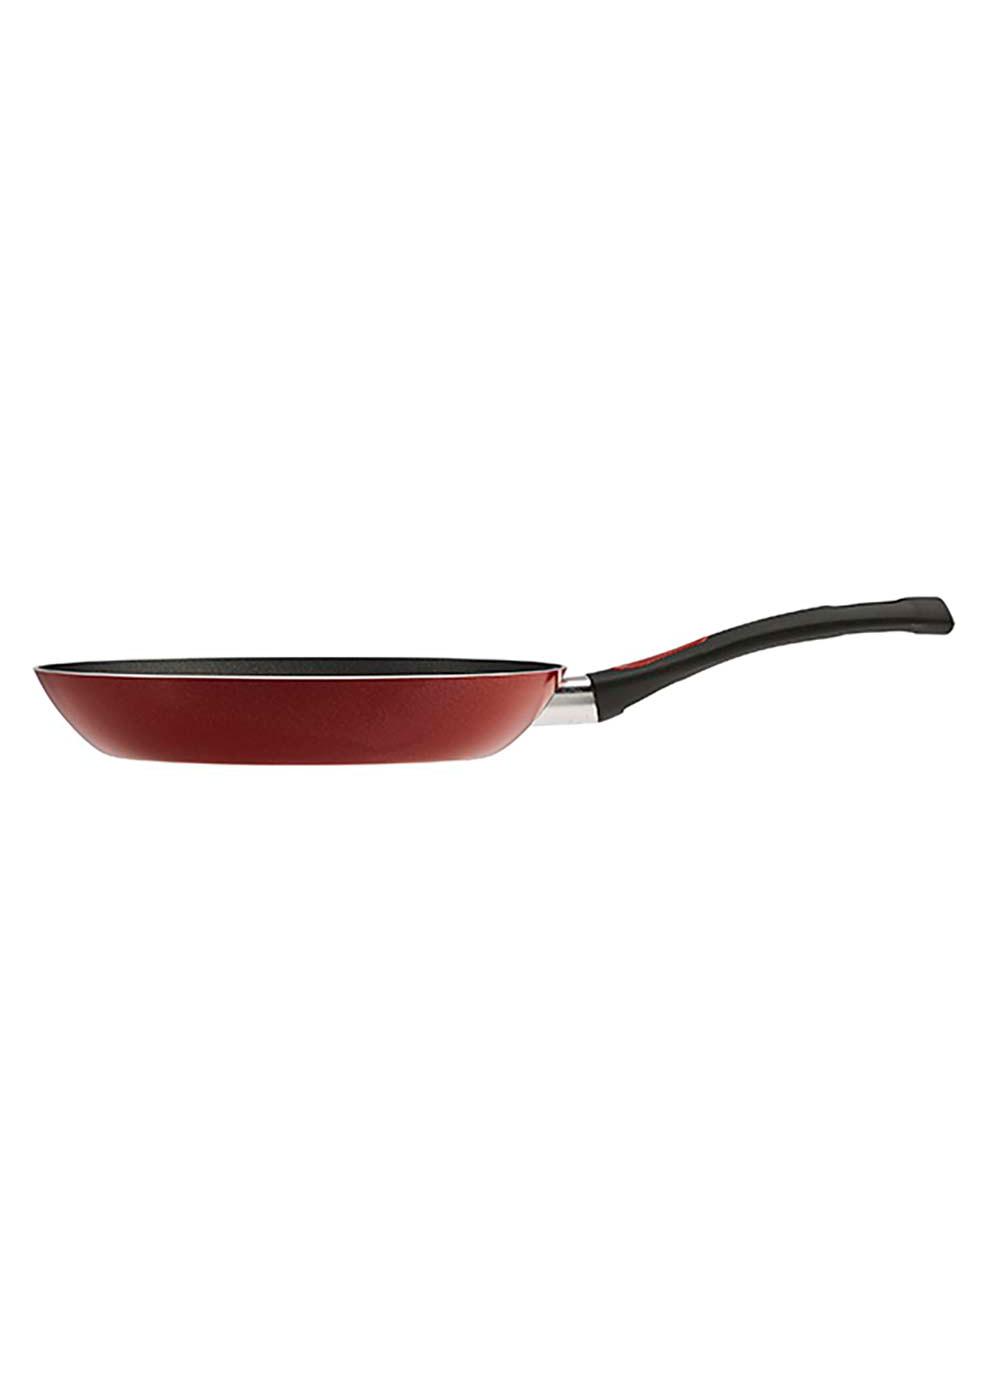 Tramontina Non-Stick Red Cookware Set; image 4 of 14